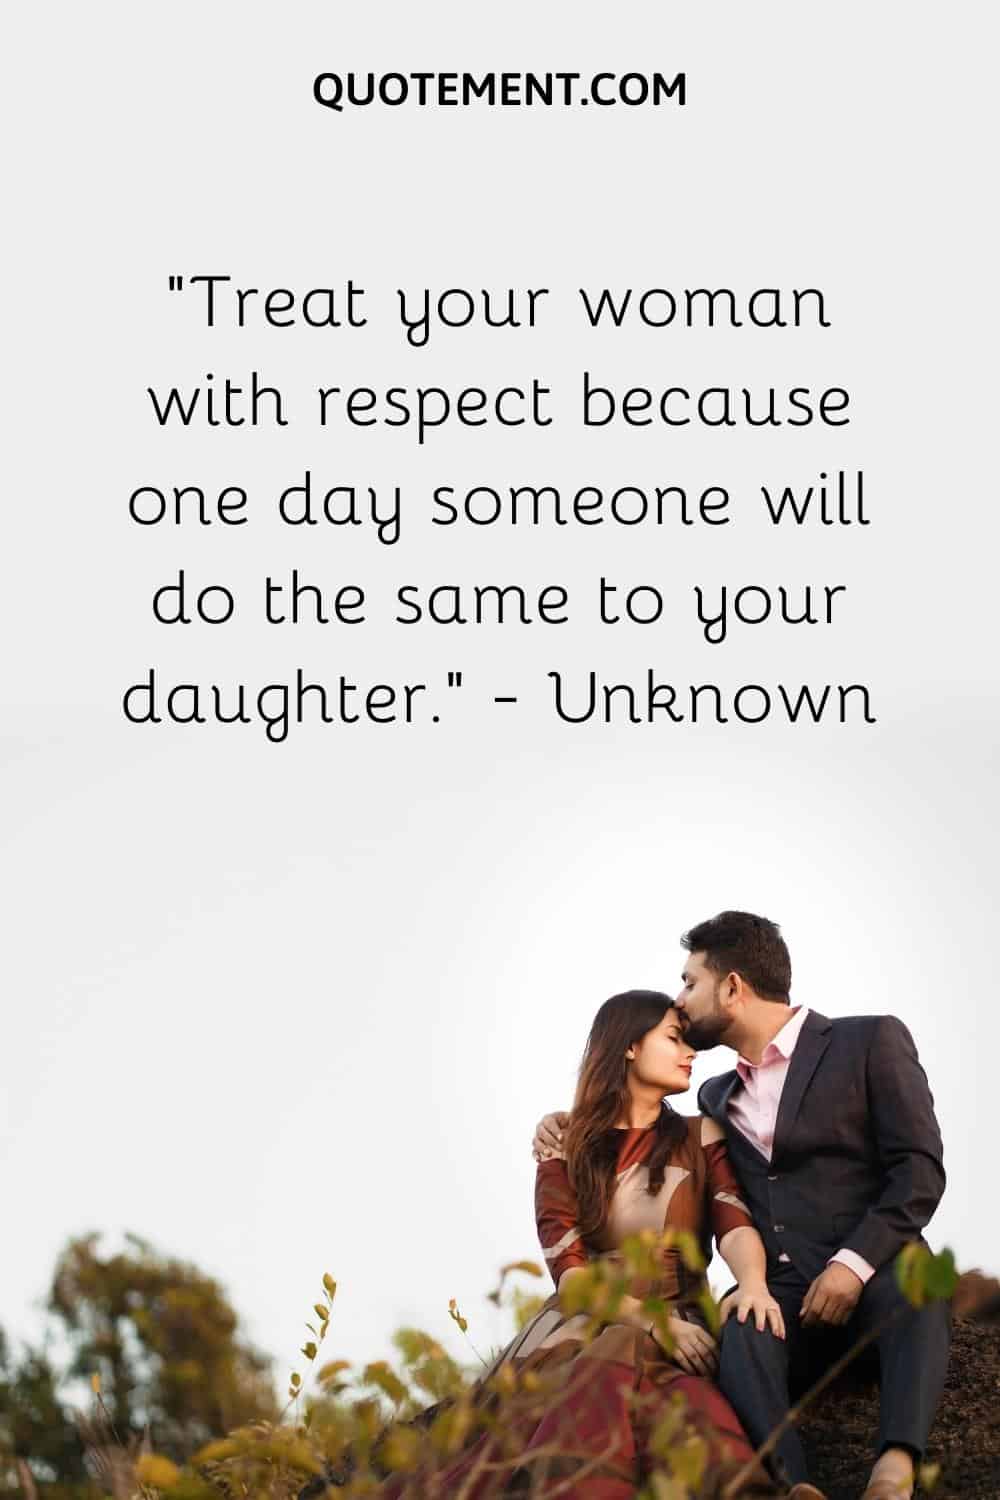 Treat your woman with respect because one day someone will do the same to your daughter